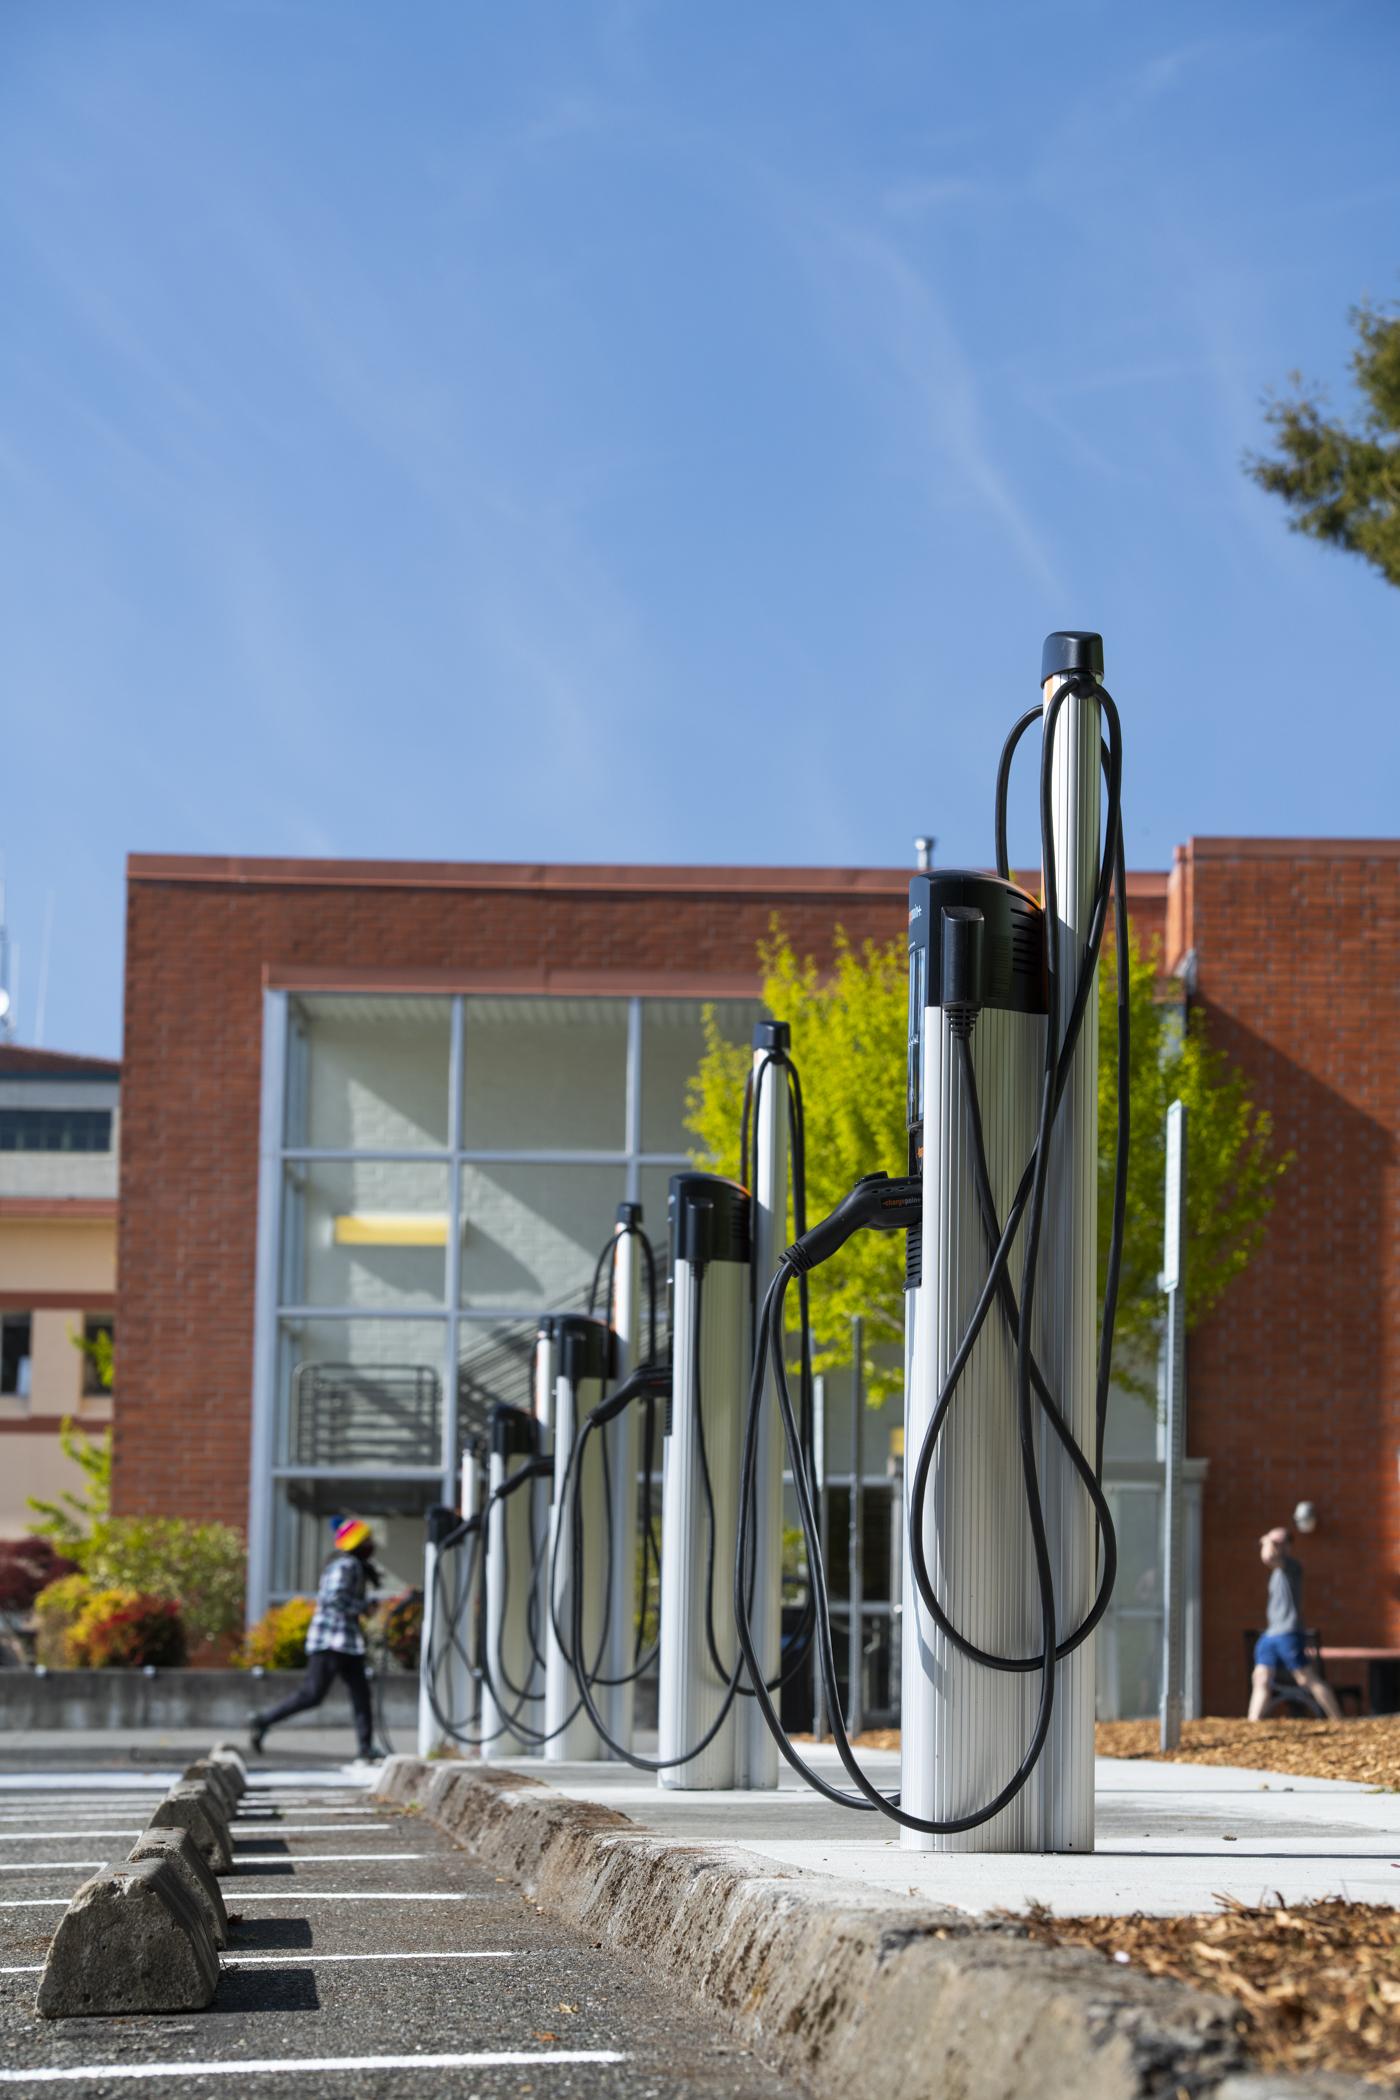 Cal Poly Humboldt is committed to supporting Electric Vehicles as a sustainable transportation option for our campus community, as they help to reduce Greenhouse Gas emissions and improve ambient air quality. The University provides employees, students, a